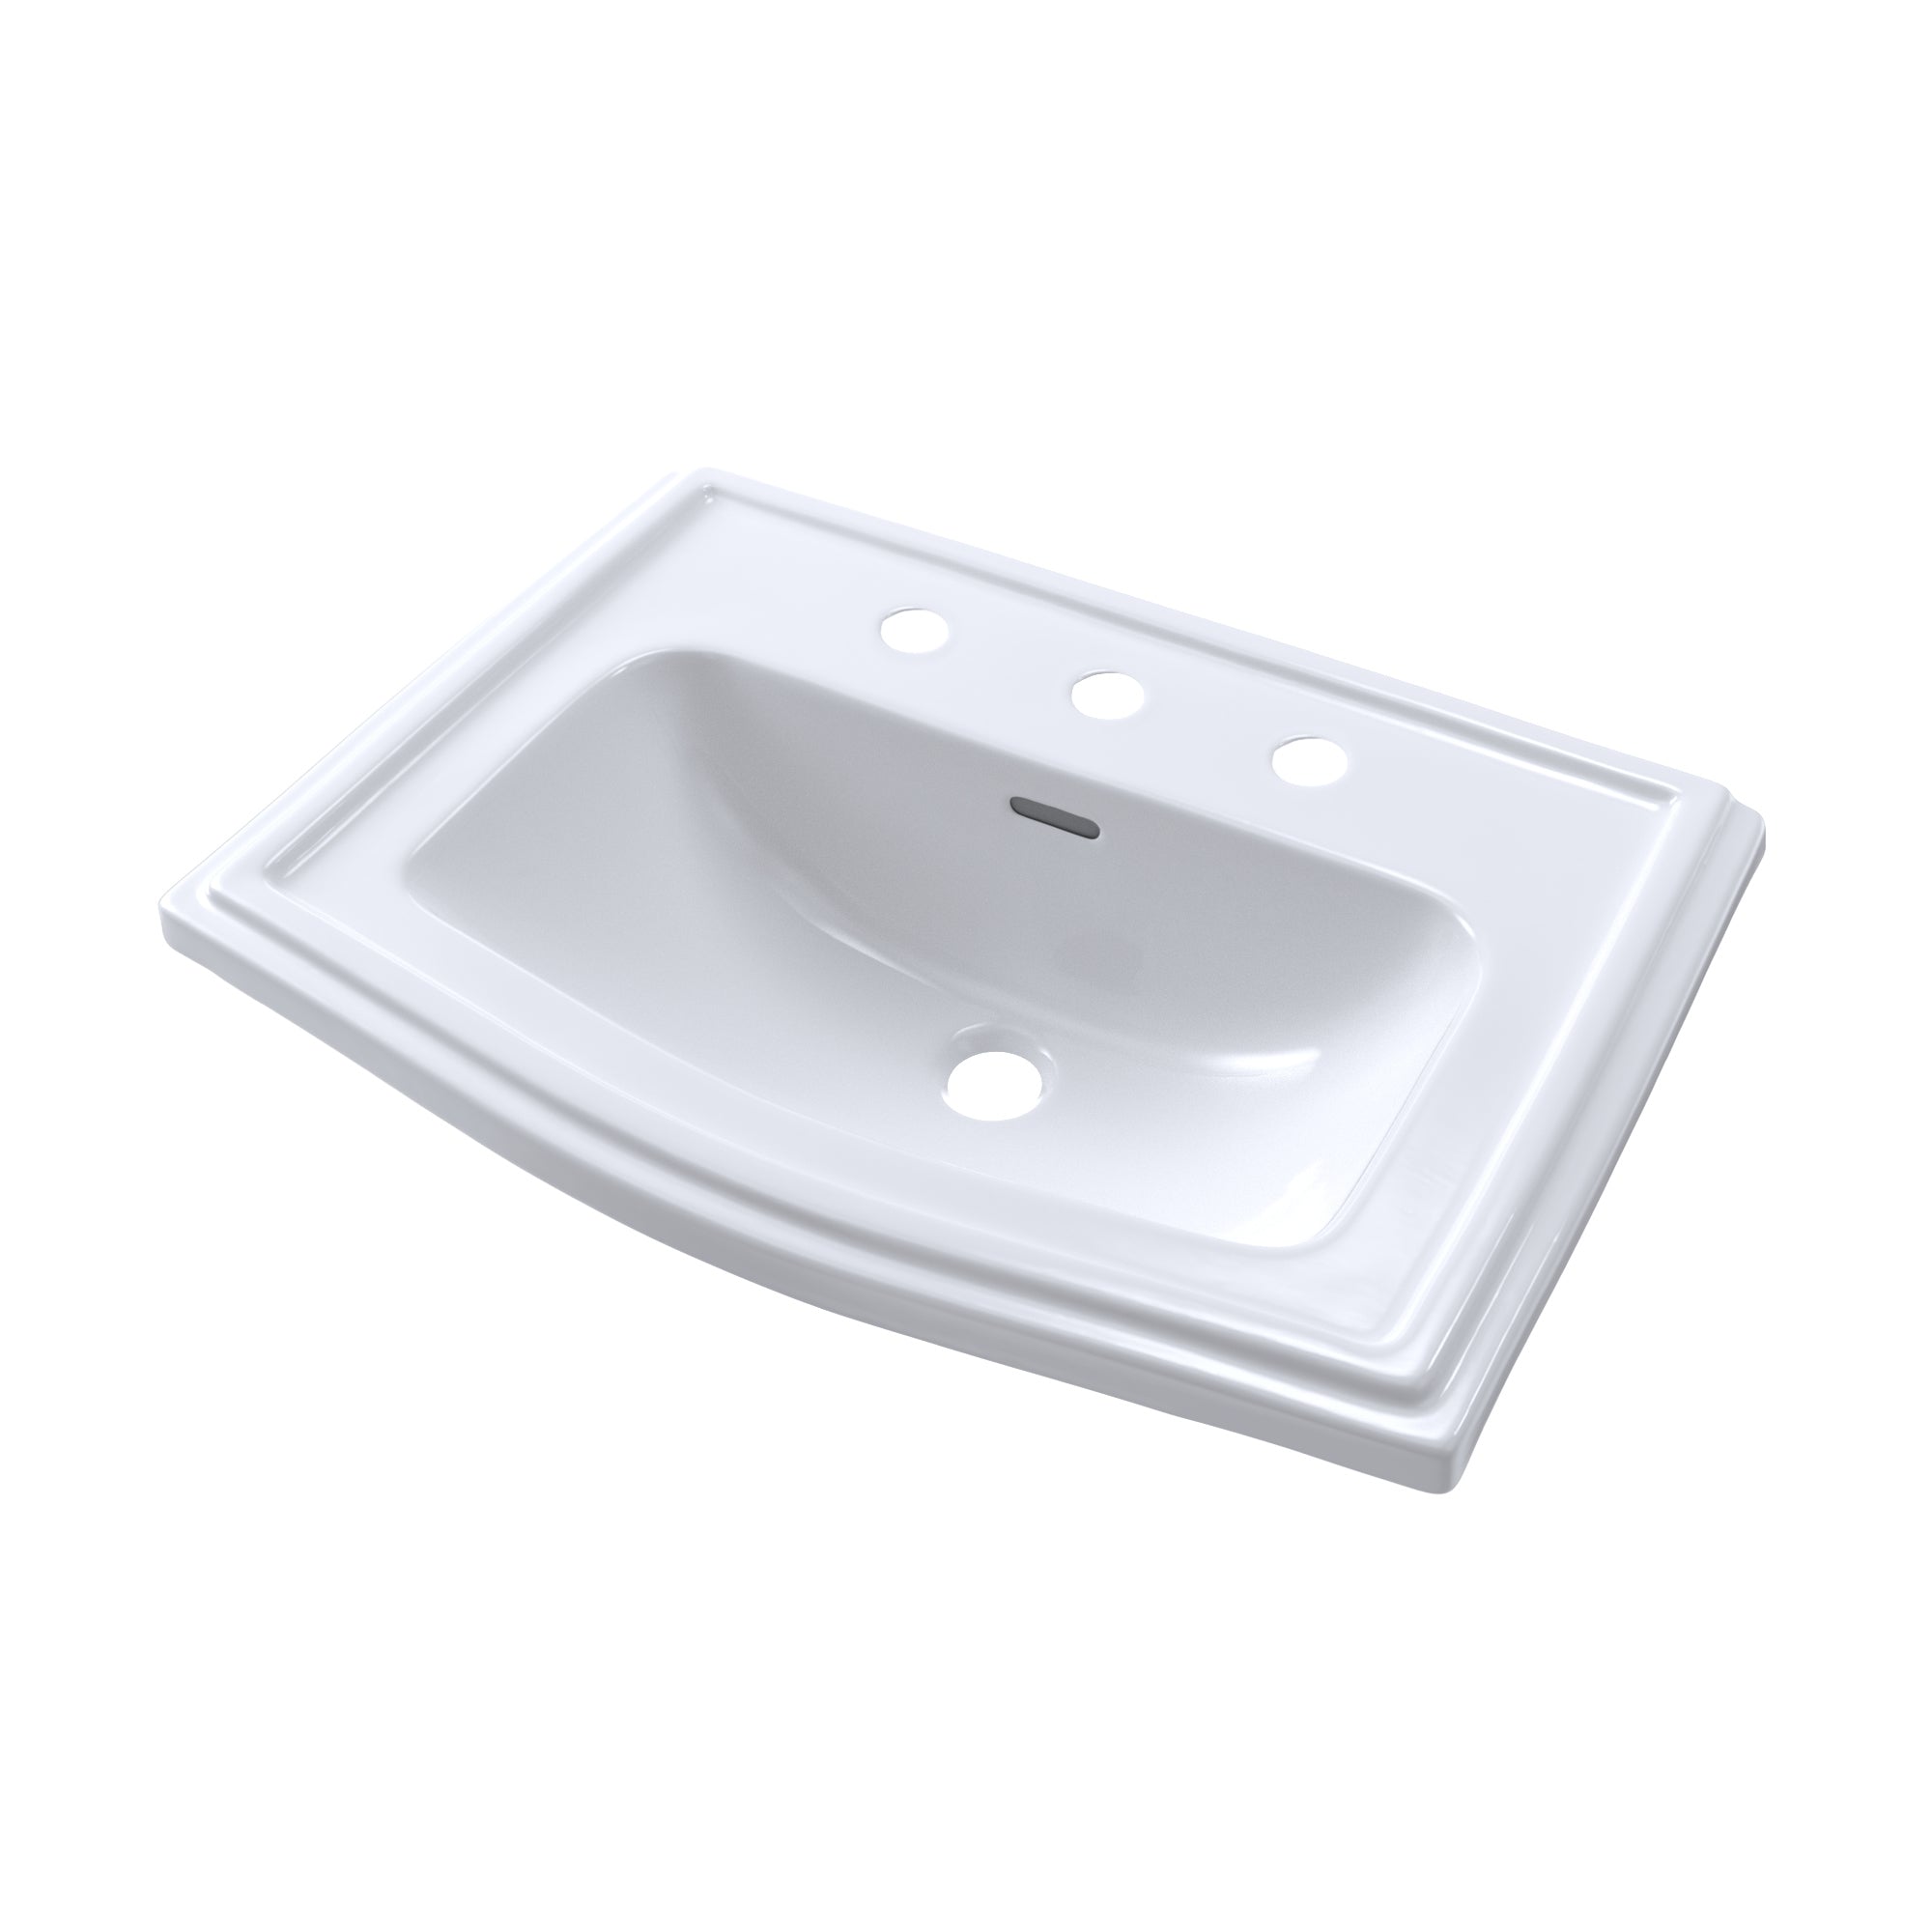 TOTO? Clayton? Rectangular Self-Rimming Drop-In Bathrrom Sink for 8 Inch Center Faucets, Cotton White - LT781.8#01